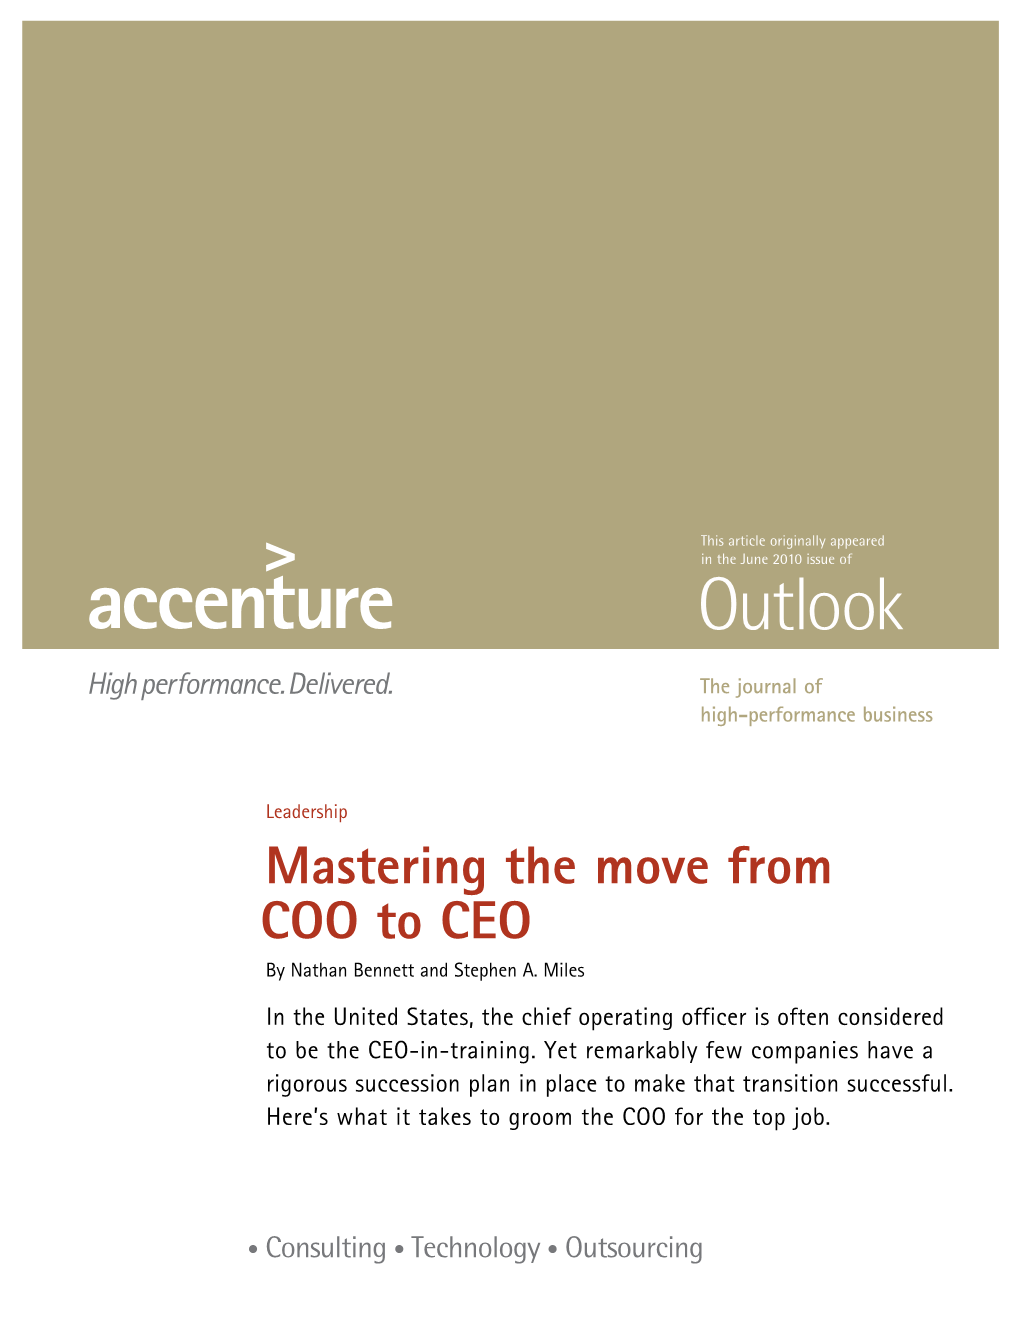 Mastering the Move from COO to CEO by Nathan Bennett and Stephen A